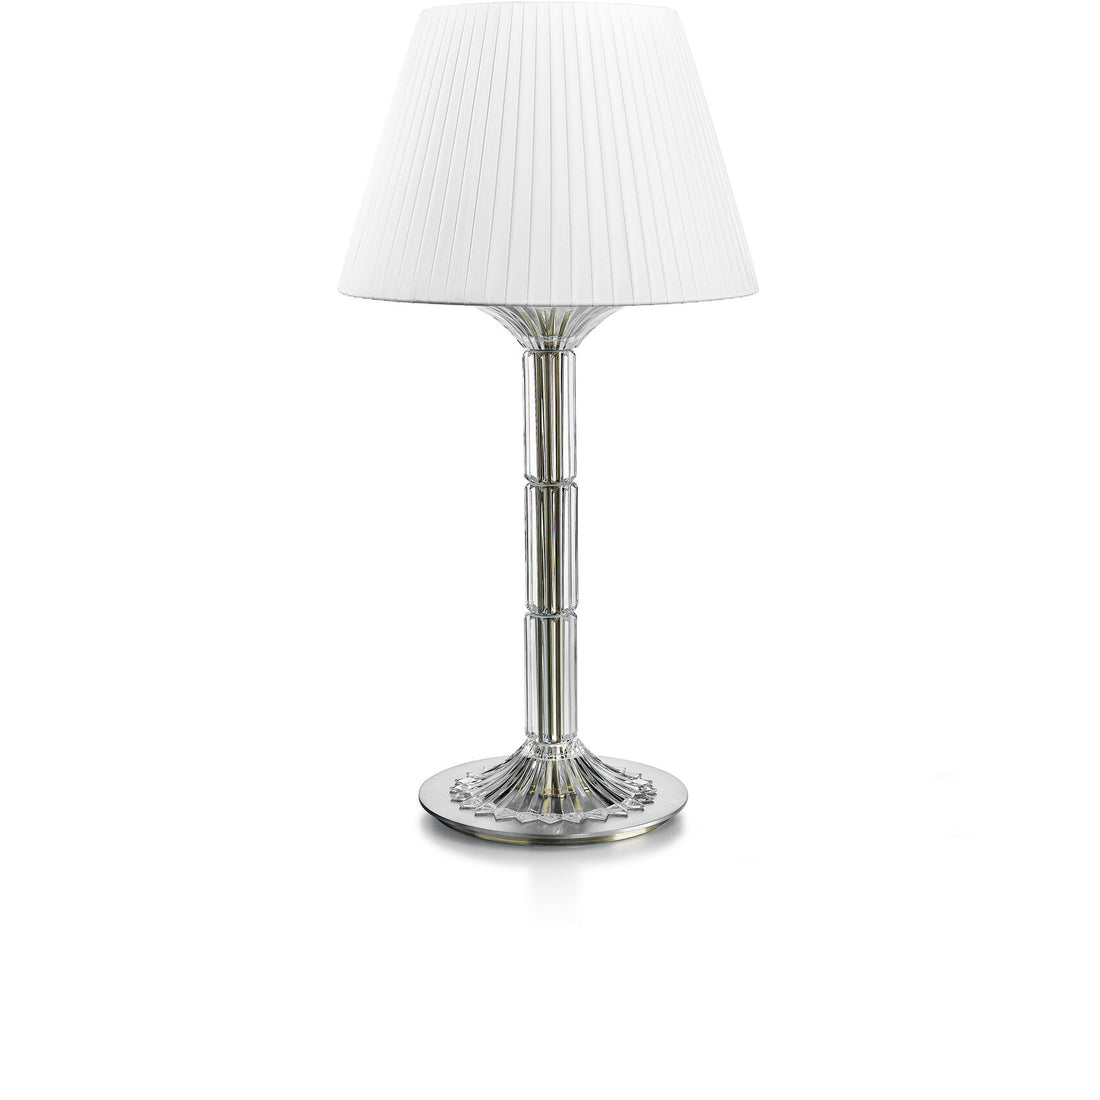 Mille Nuits Lamp Small Size